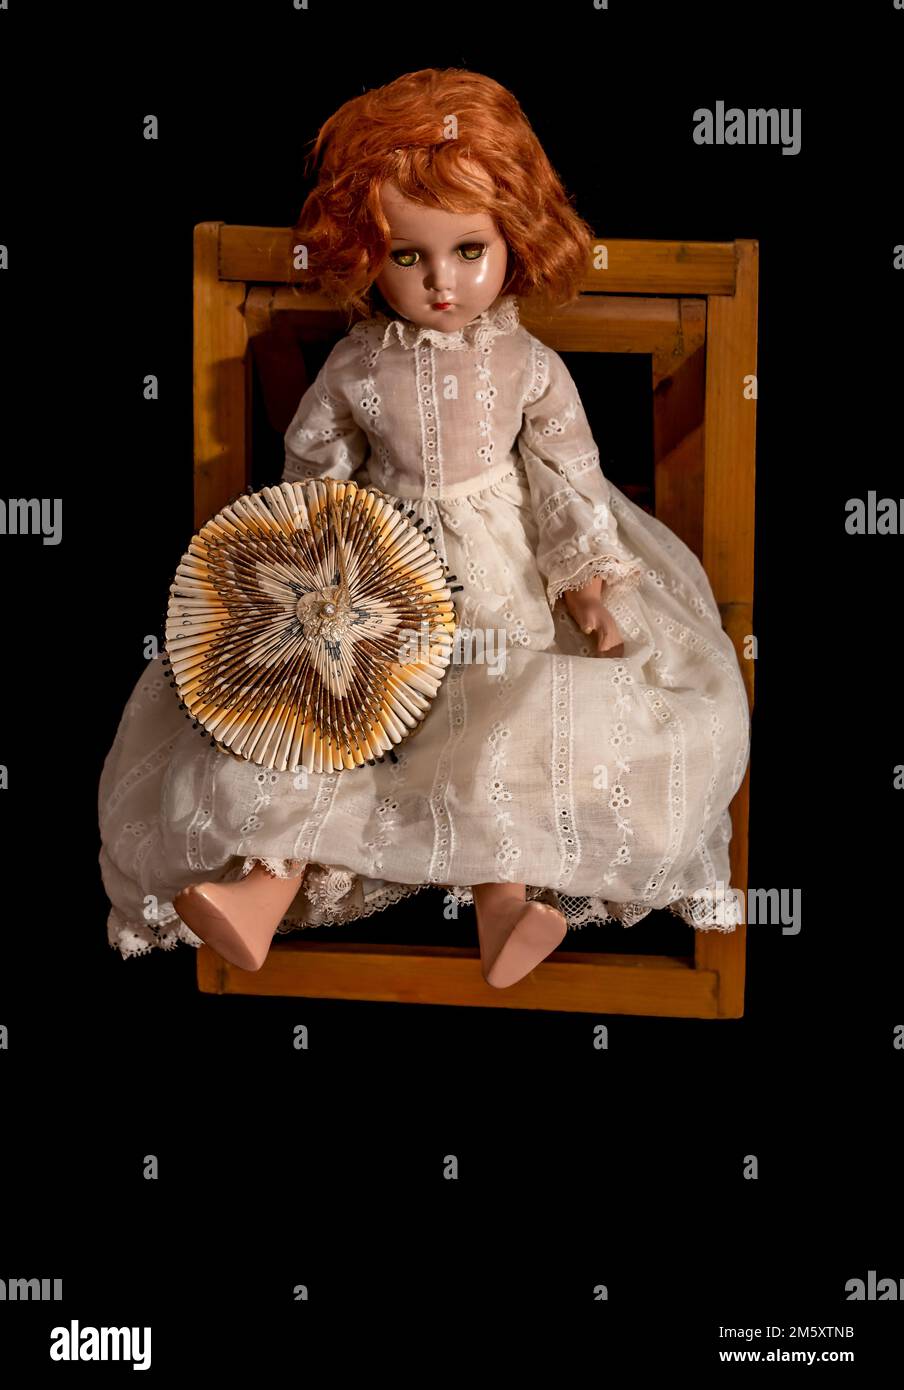 A vintage child’s doll, sitting in a wooden chair, with red hair, wearing a white dress and a holding vintage umbrella made from cigarette packages. Stock Photo